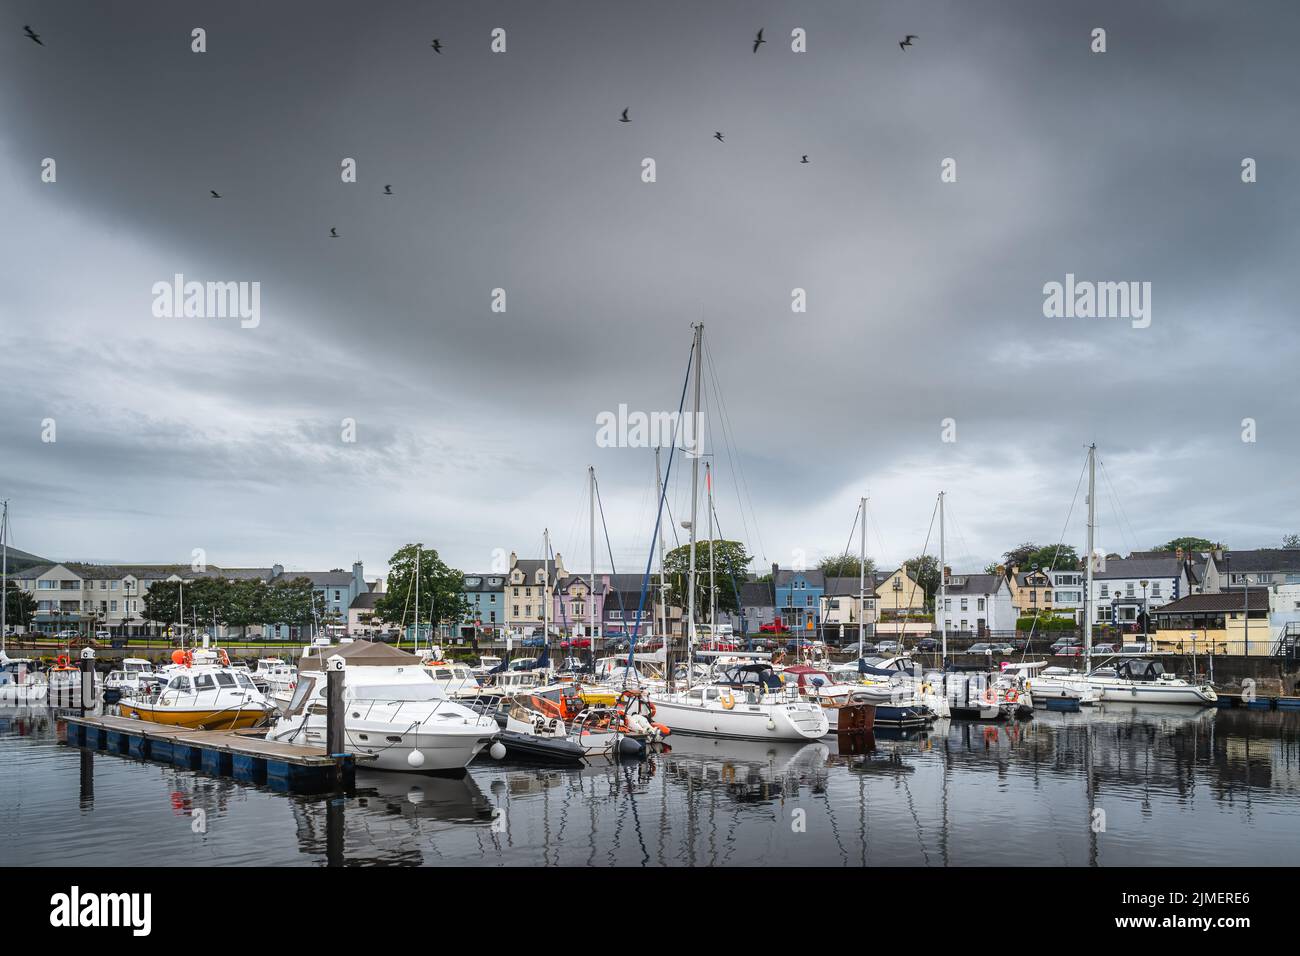 Yachts and sailboats moored in small, beautiful marina in Ballycastle town Stock Photo